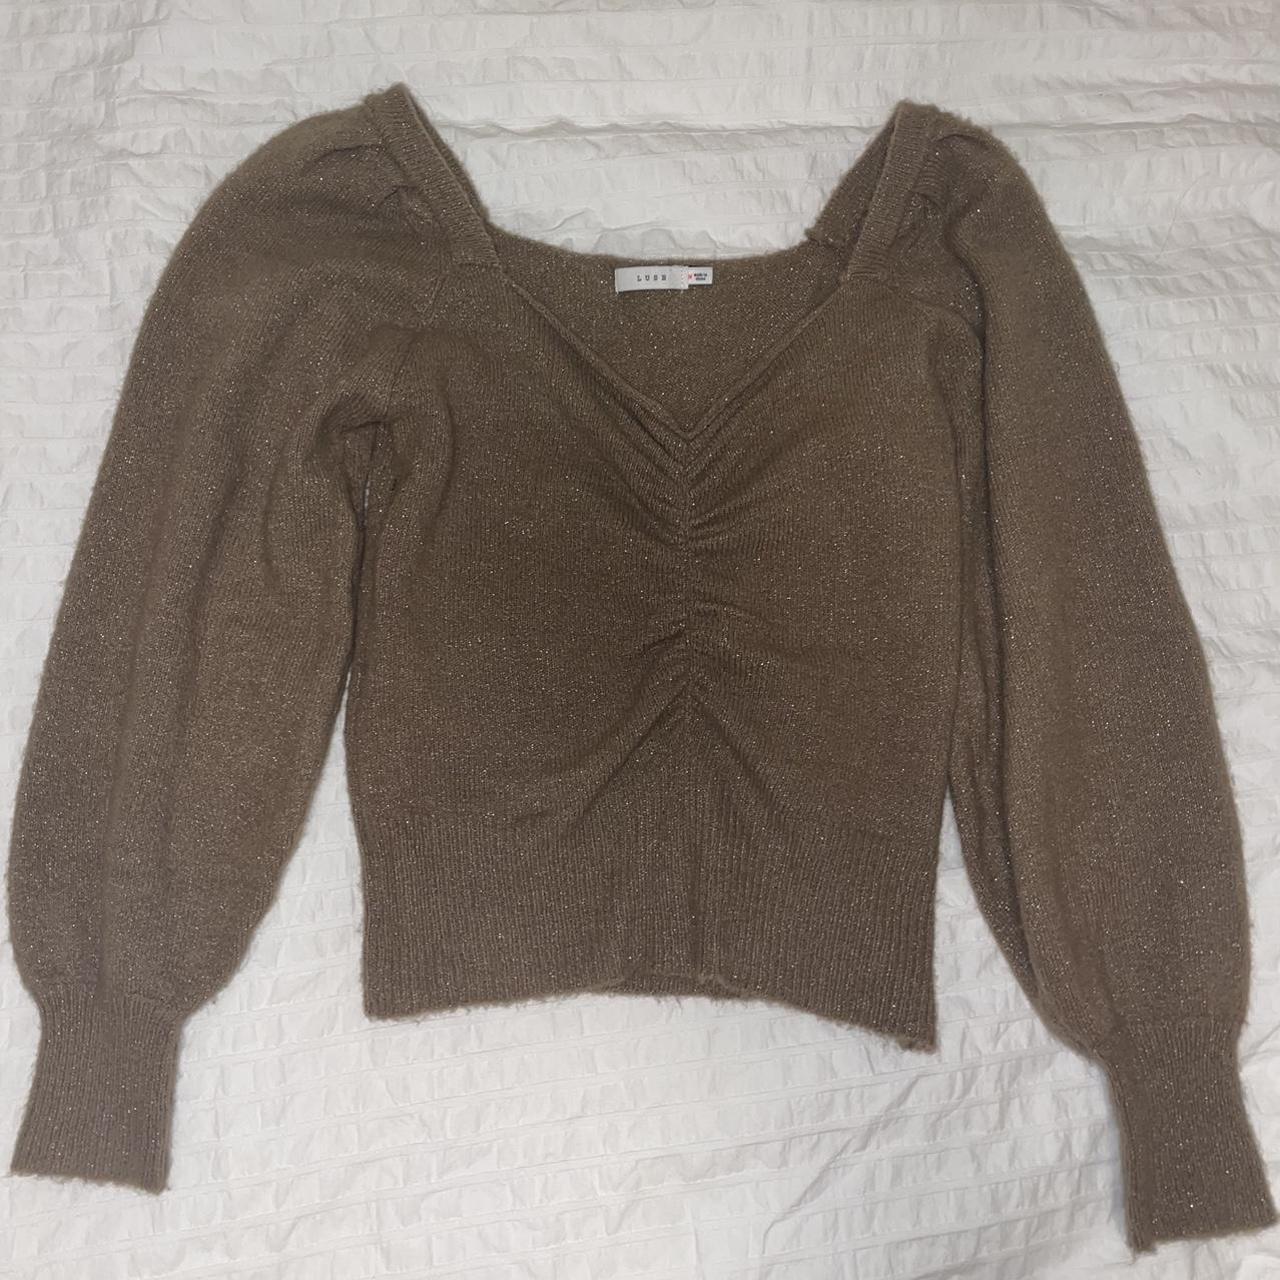 LUSH Clothing Women's Brown and Tan Jumper